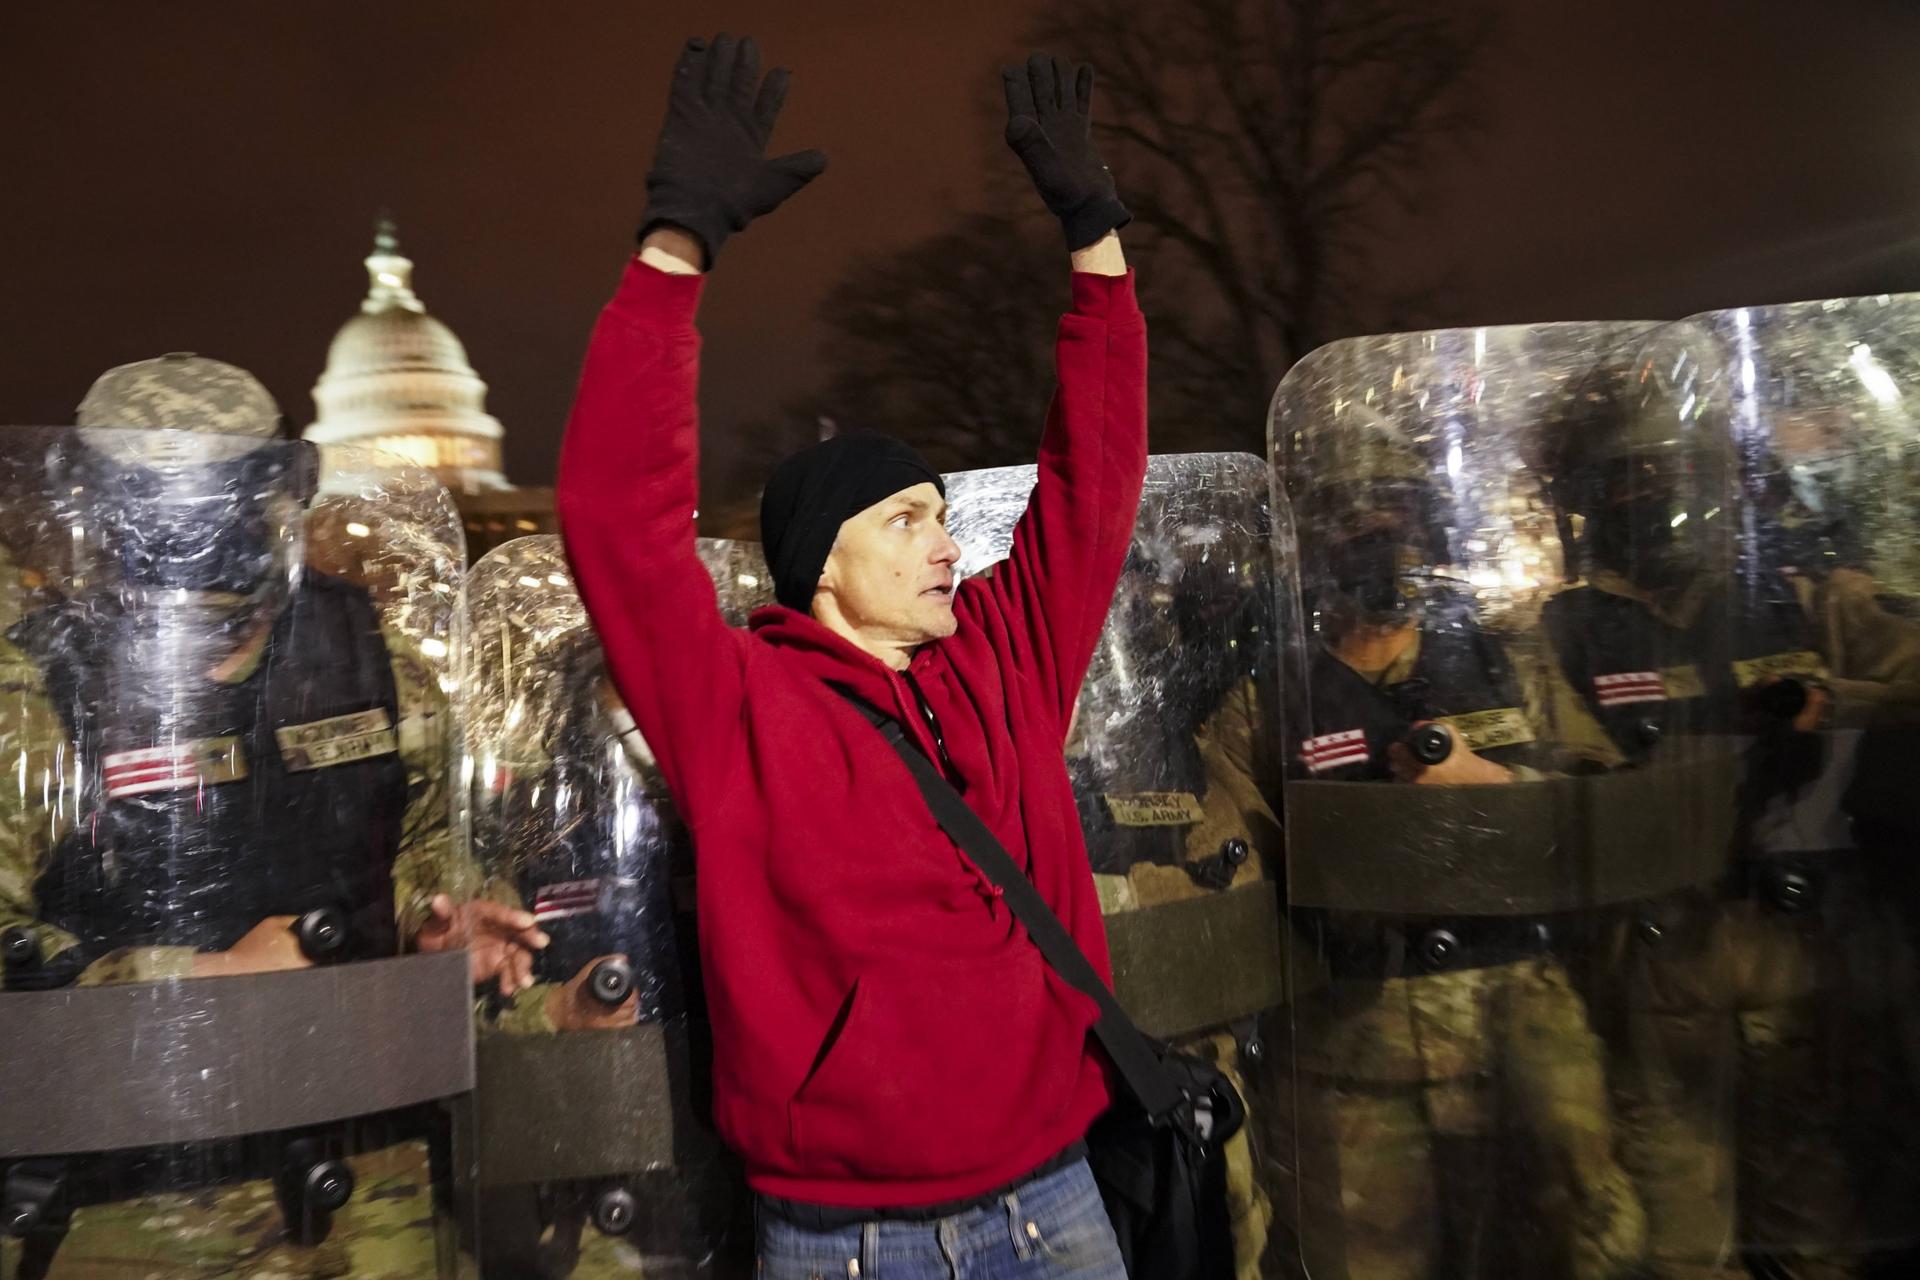 National guard appear behind a man wearing a red sweater, who has his hands up.